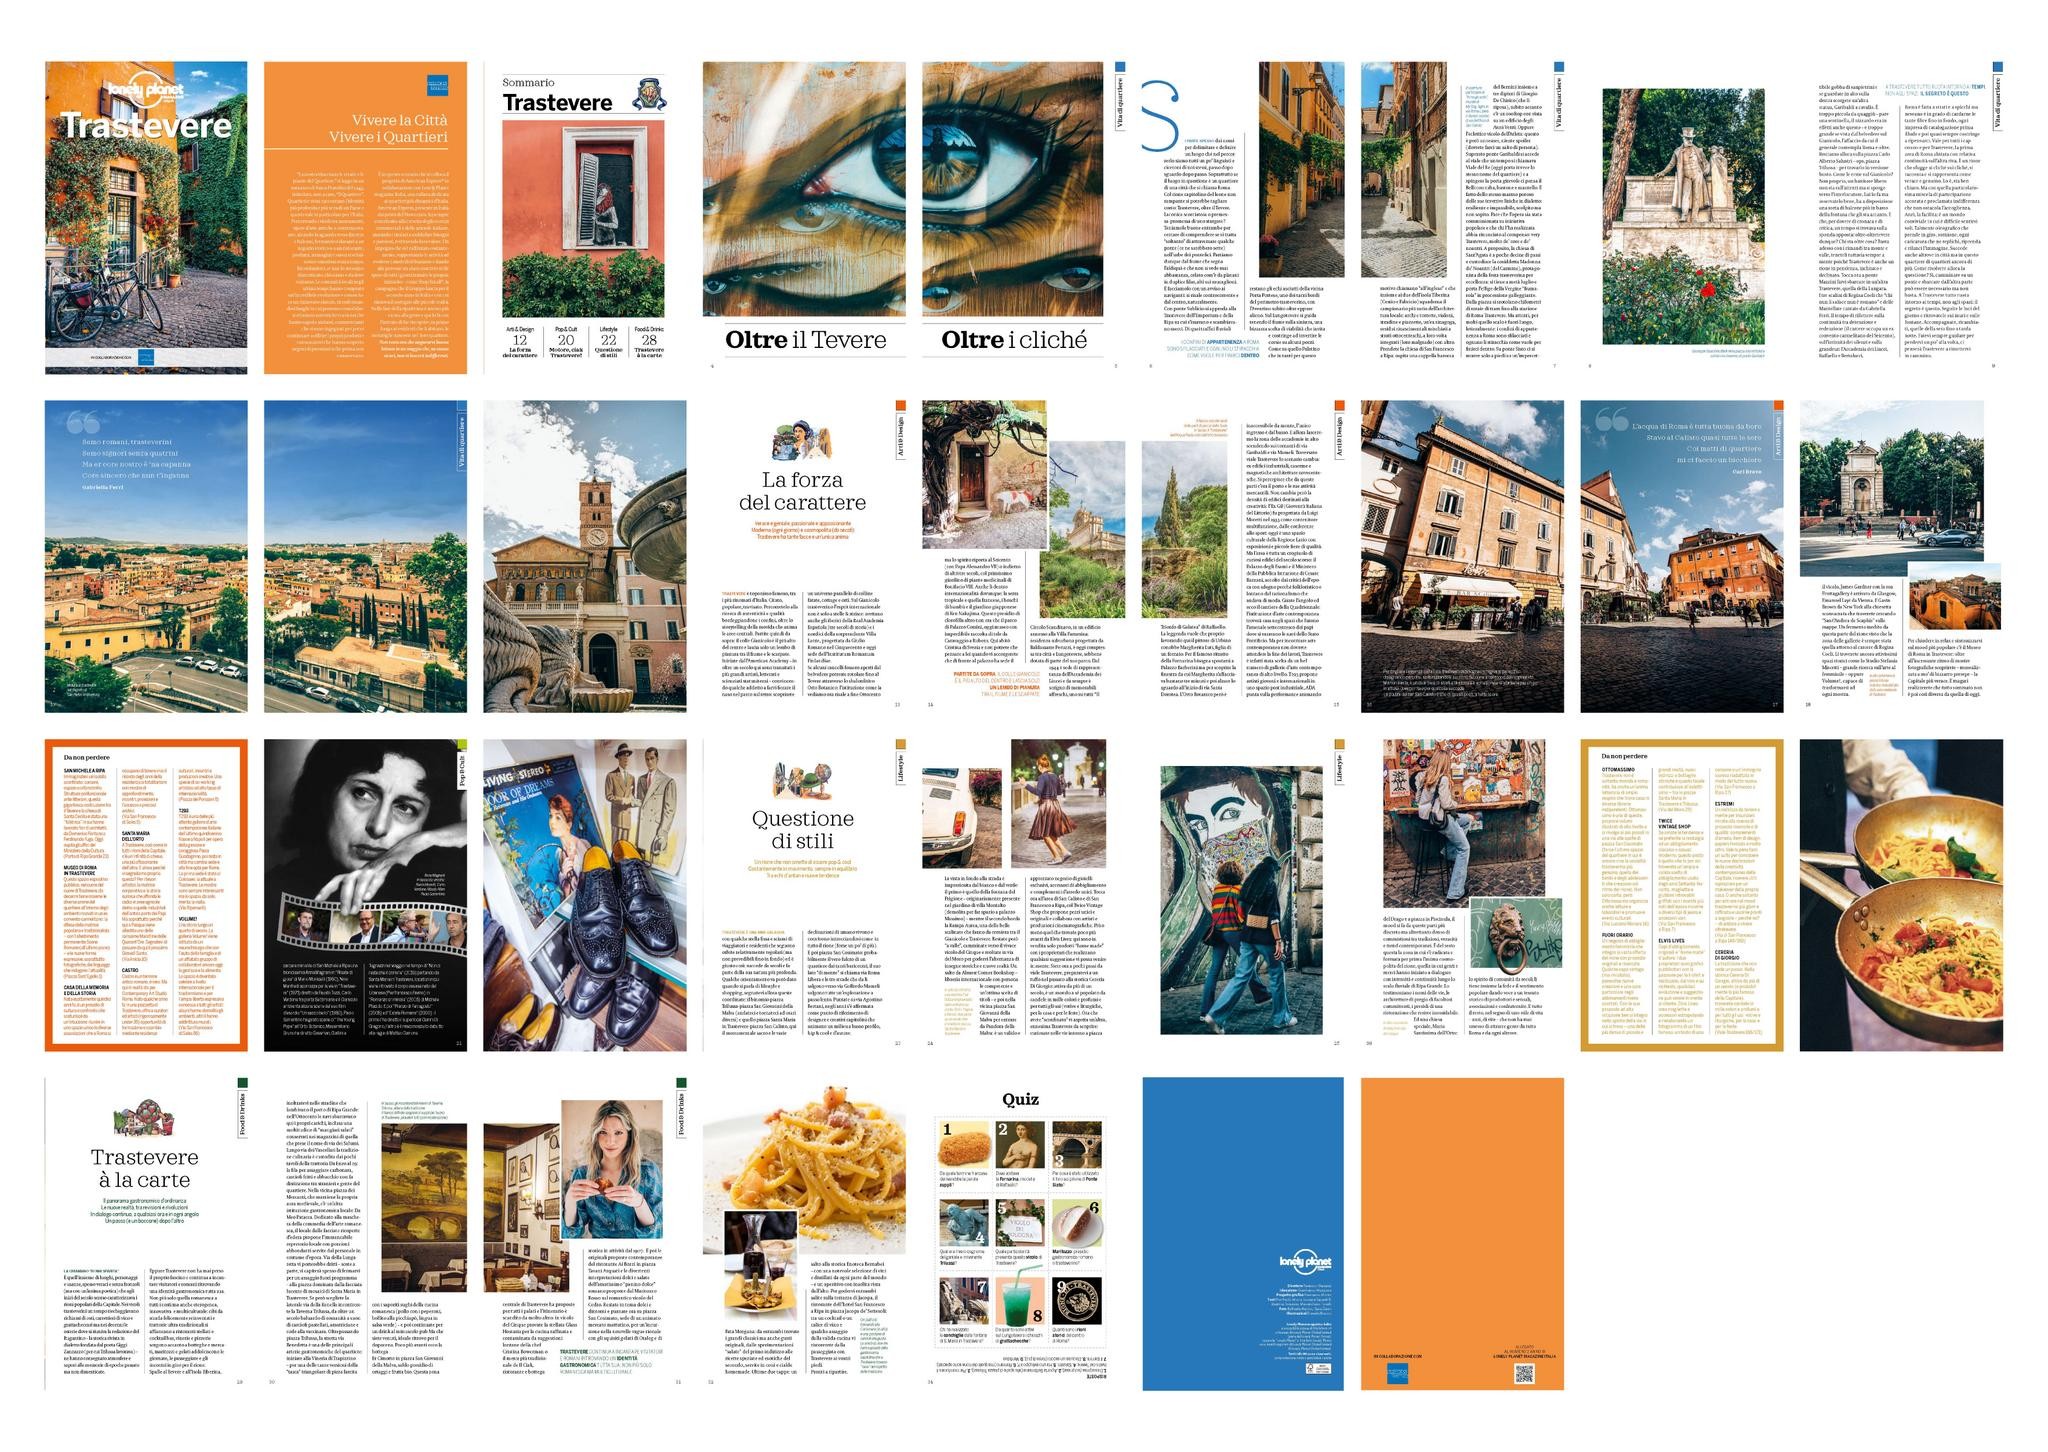 LONELY PLANET SMALL GUIDES BY AMERICAN EXPRESS